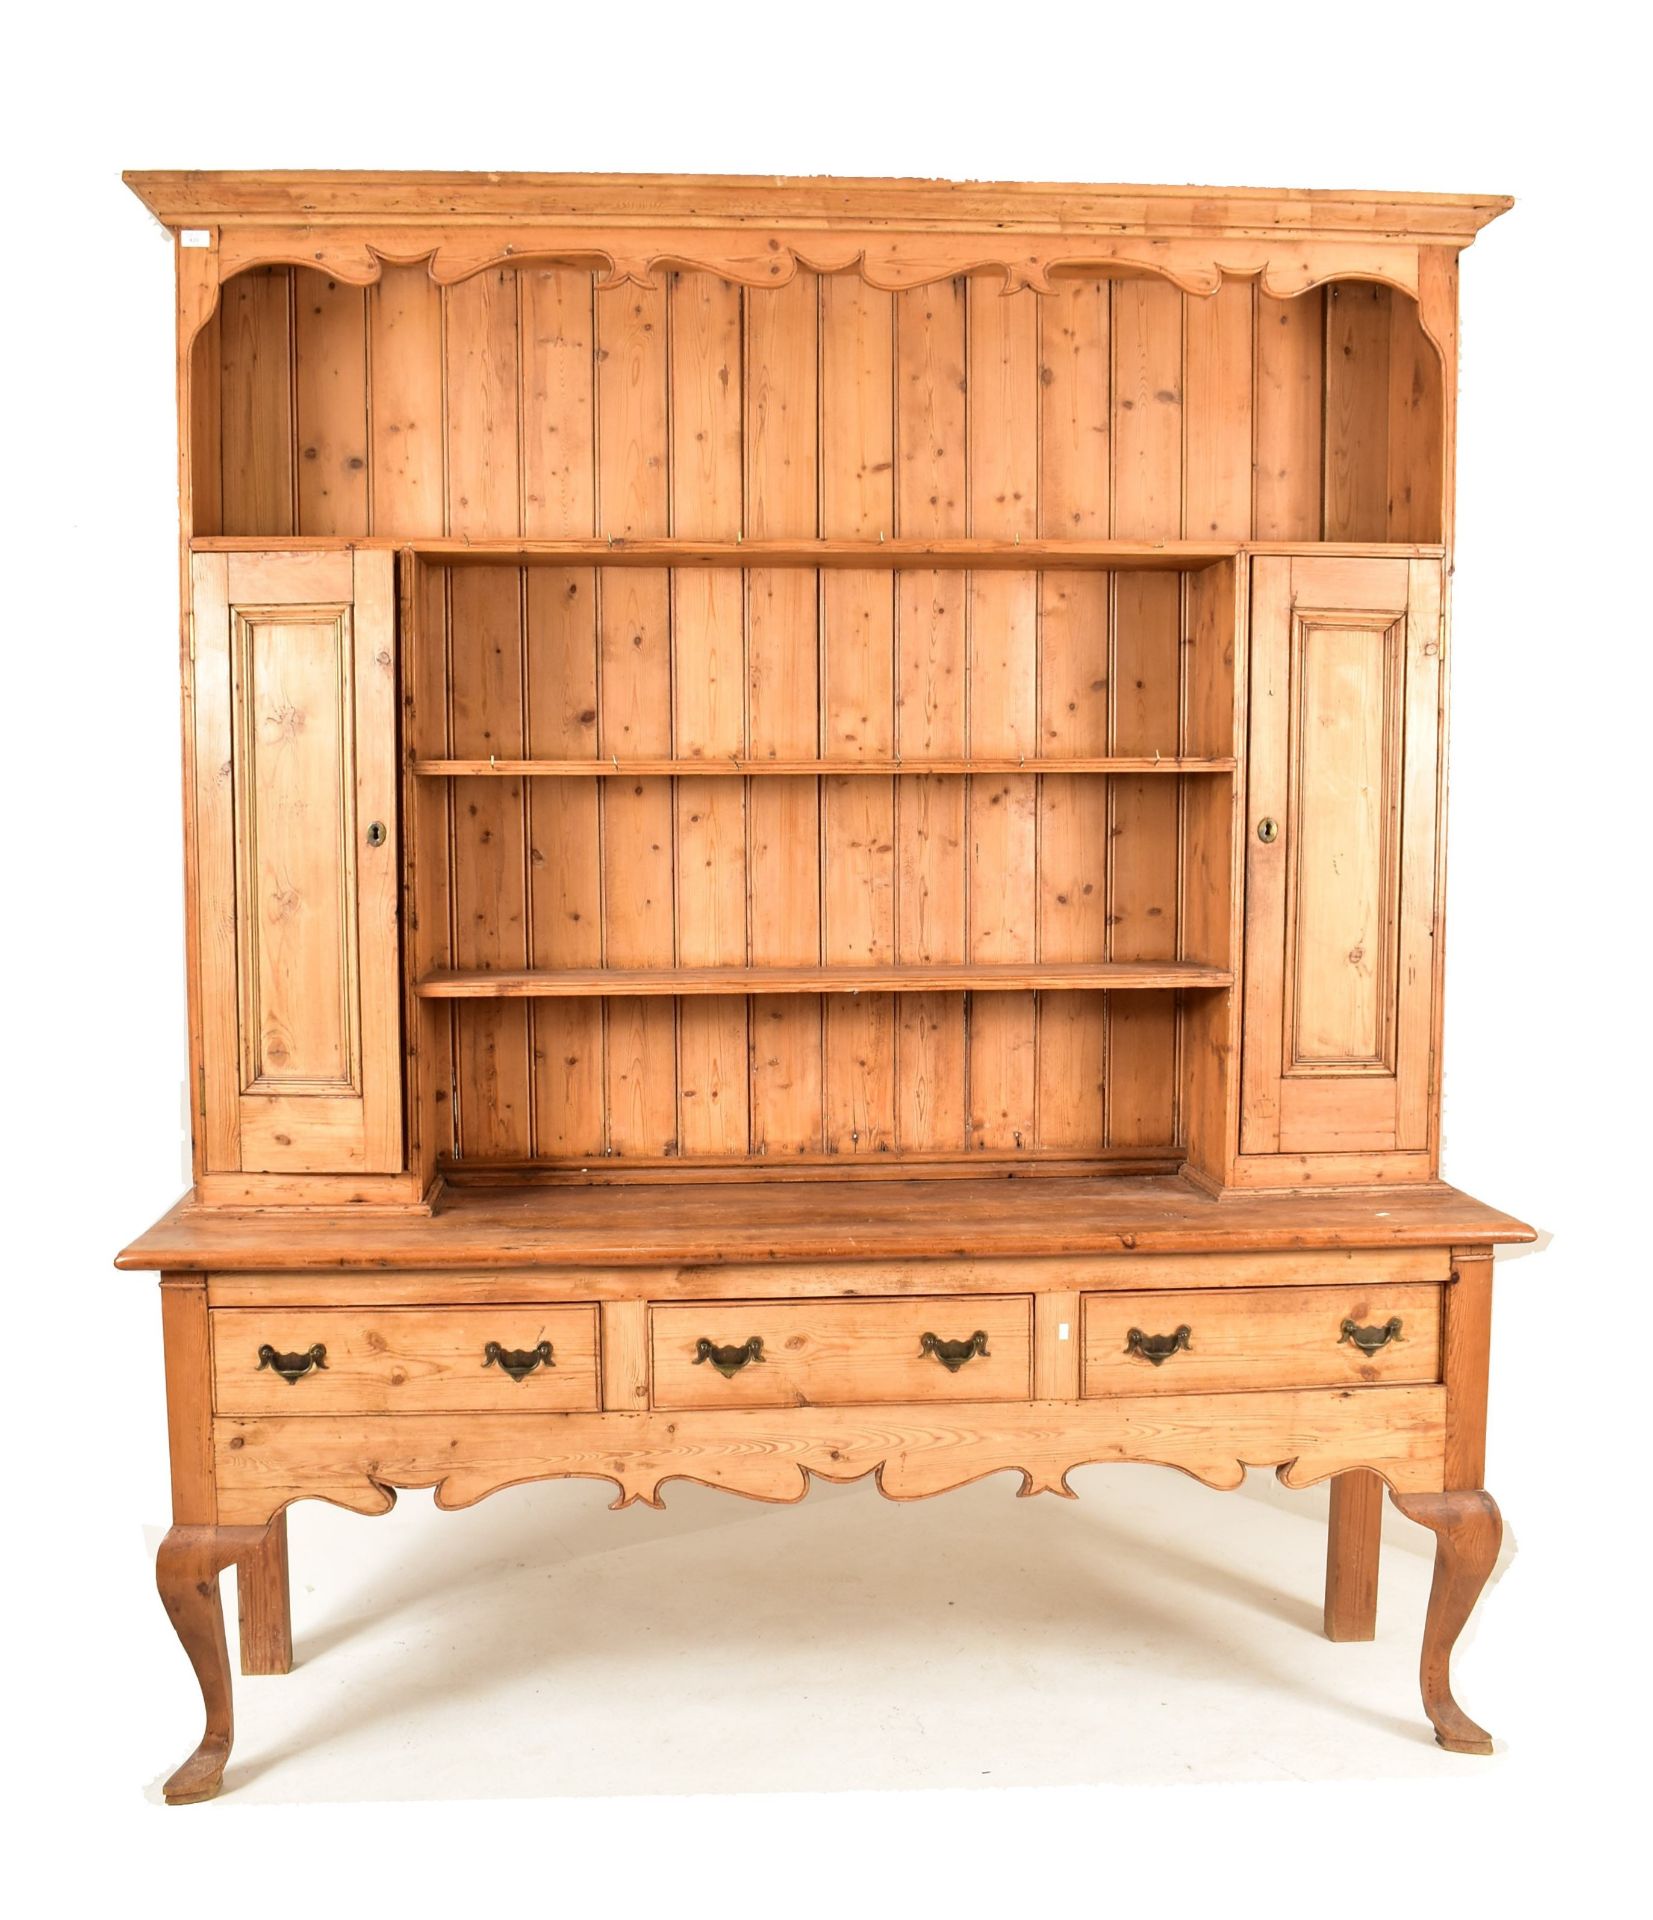 19TH CENTURY LARGE COUNTRY PINE WELSH DRESSER